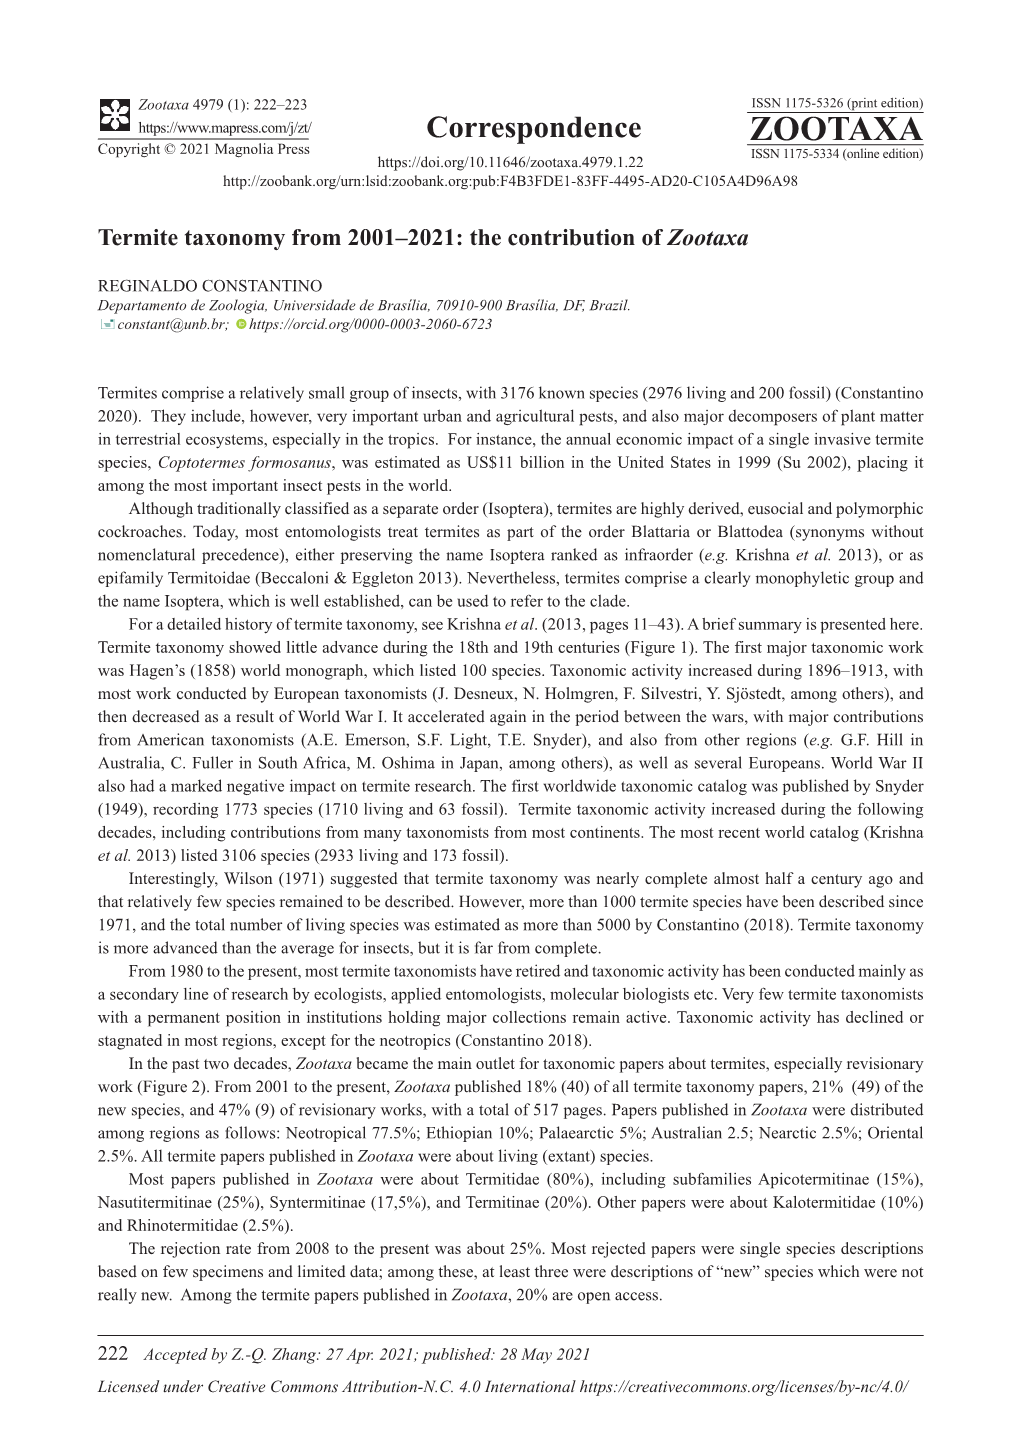 Termite Taxonomy from 2001–2021: the Contribution of Zootaxa